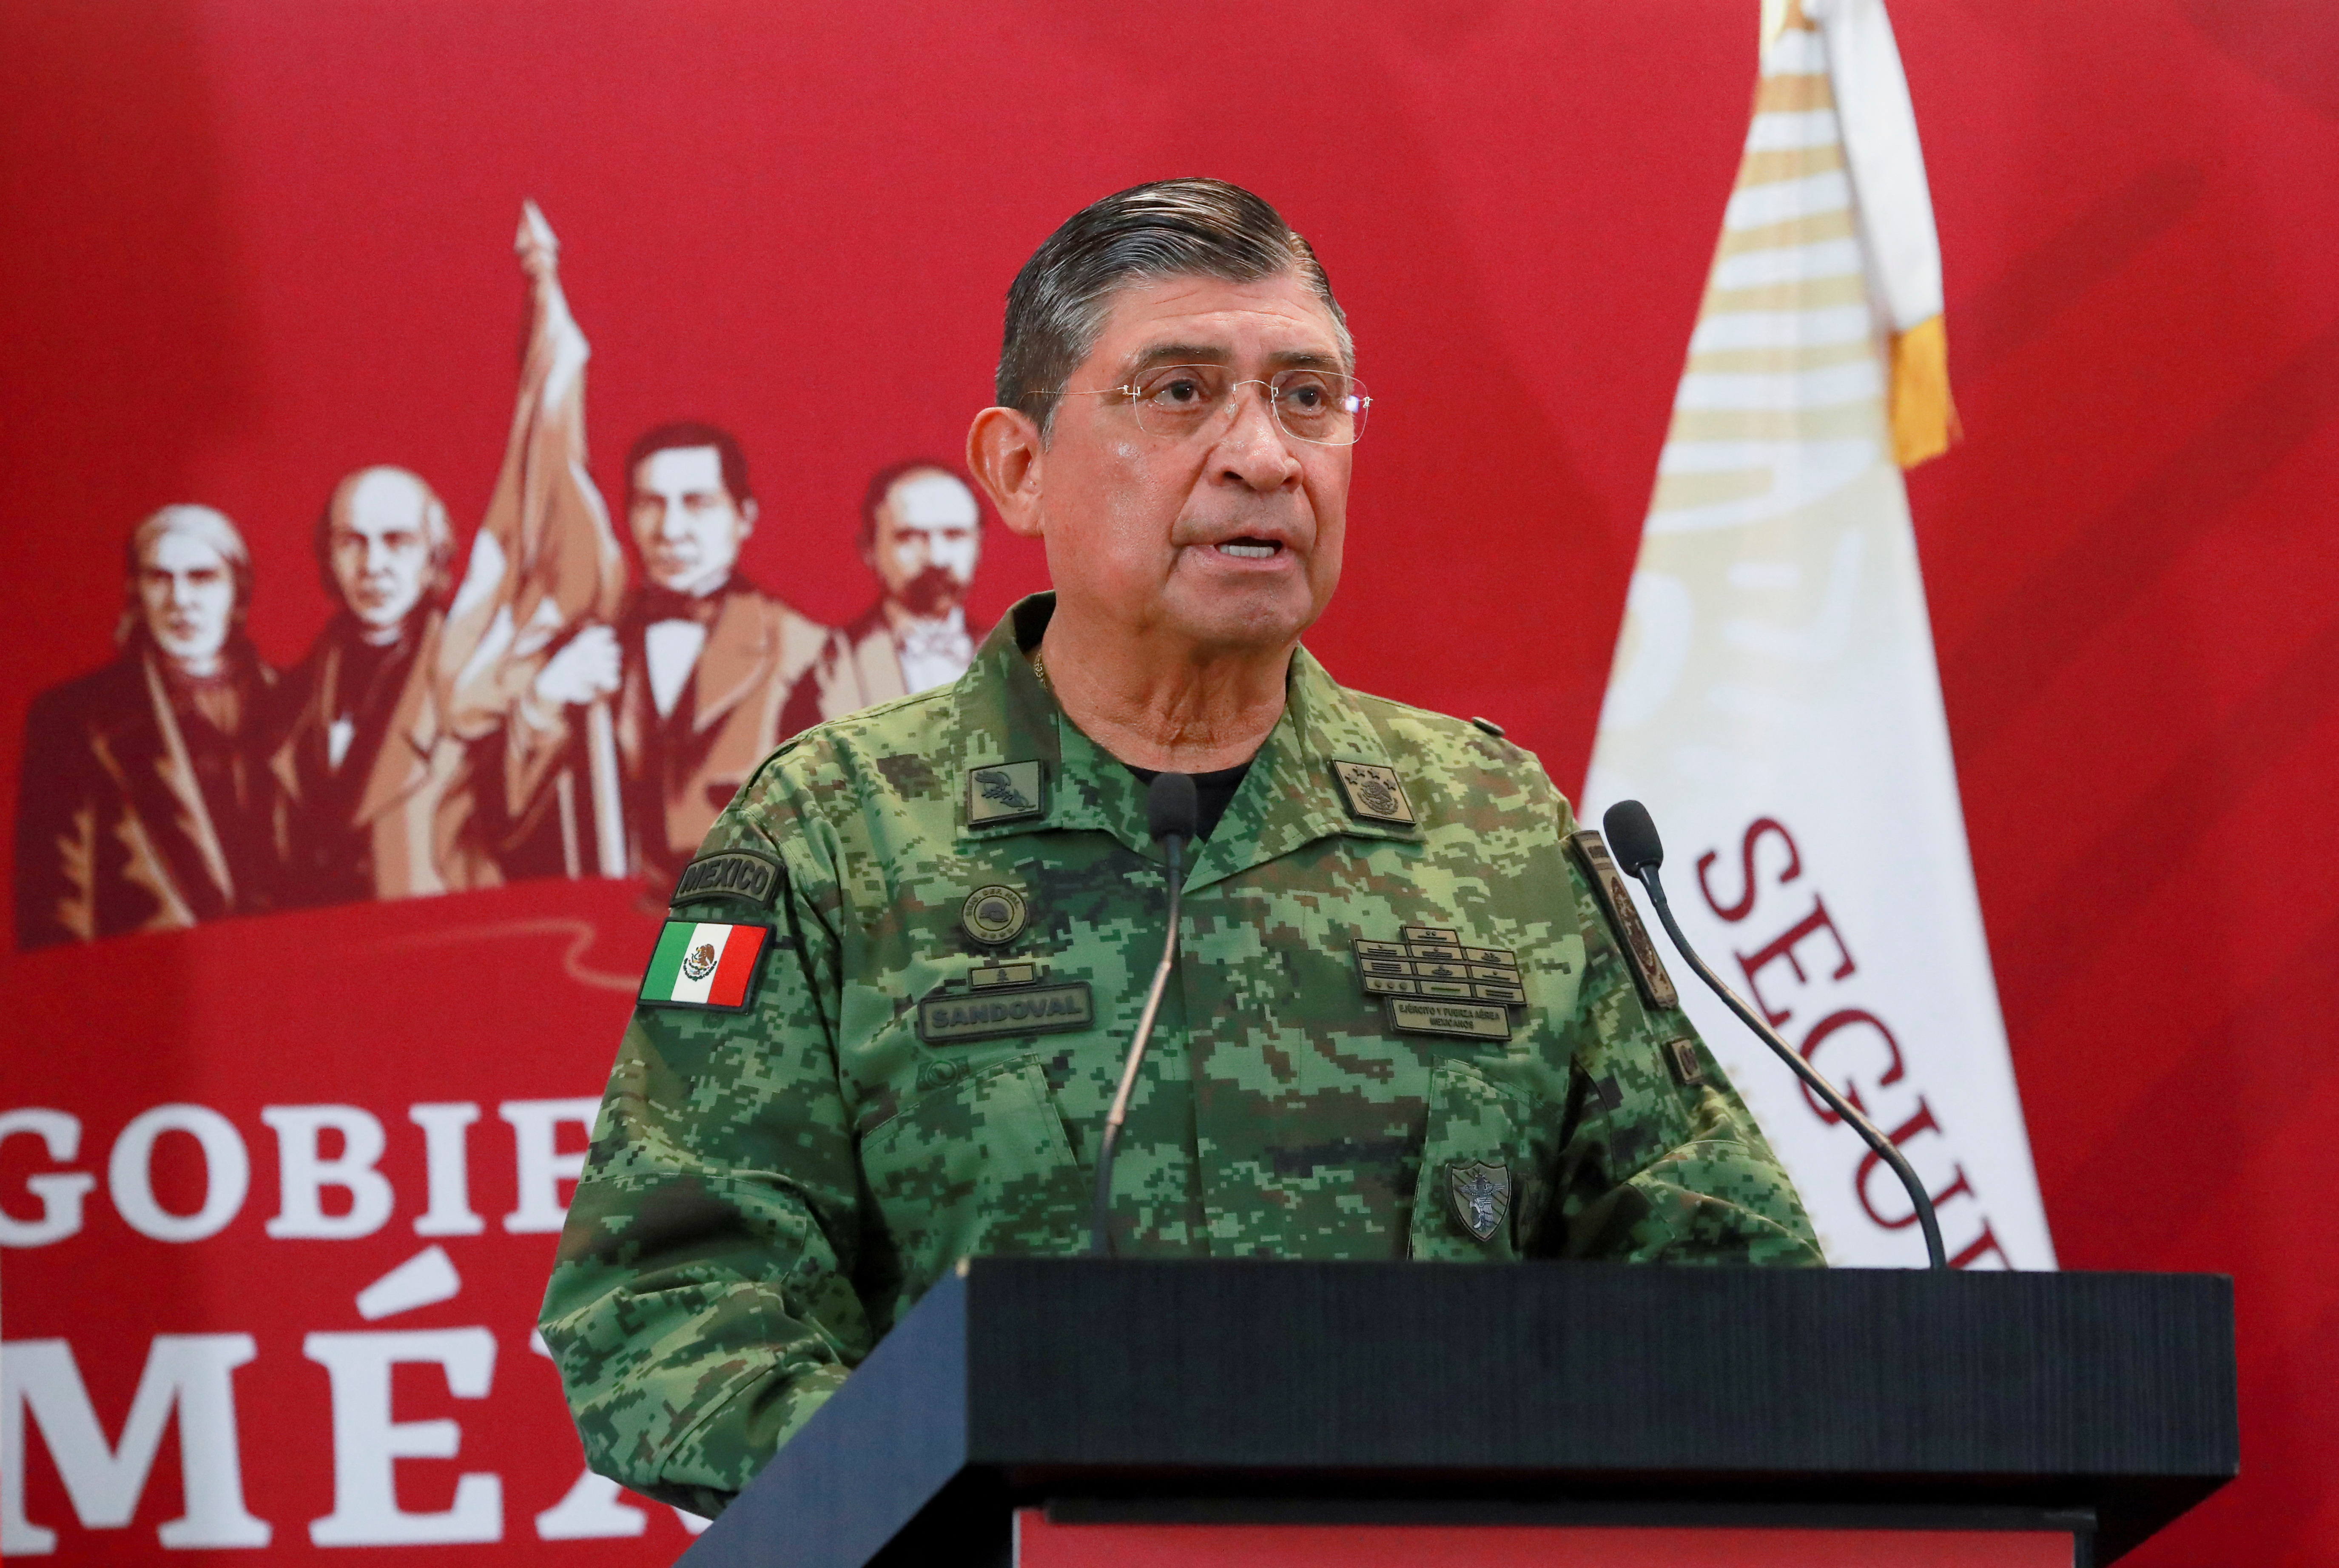 Mexico's Secretary of Defense Luis Cresencio Sandoval speaks during a news conference after Mexican drug cartel leader Ovidio Guzman, a son of incarcerated kingpin Joaquin "El Chapo" Guzman, was arrested by Mexican authorities in Culiacan, In Mexico City, Mexico January 5, 2023. REUTERS/ Henry Romero